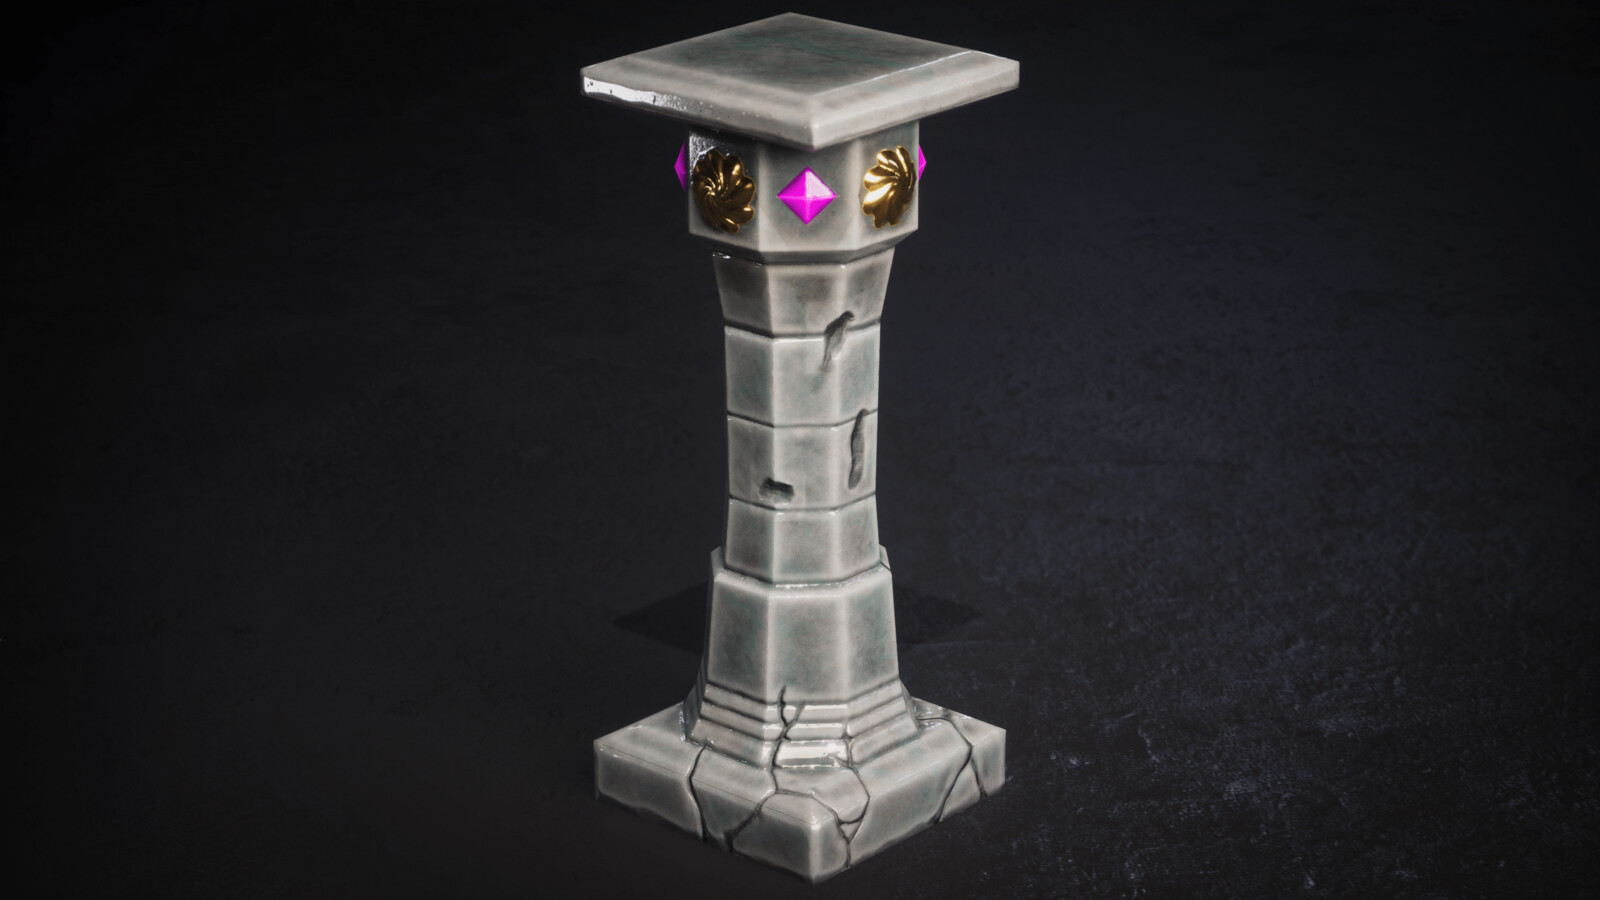 The pillar is damaged by battles the wizard had in his past, so the stone melted away.